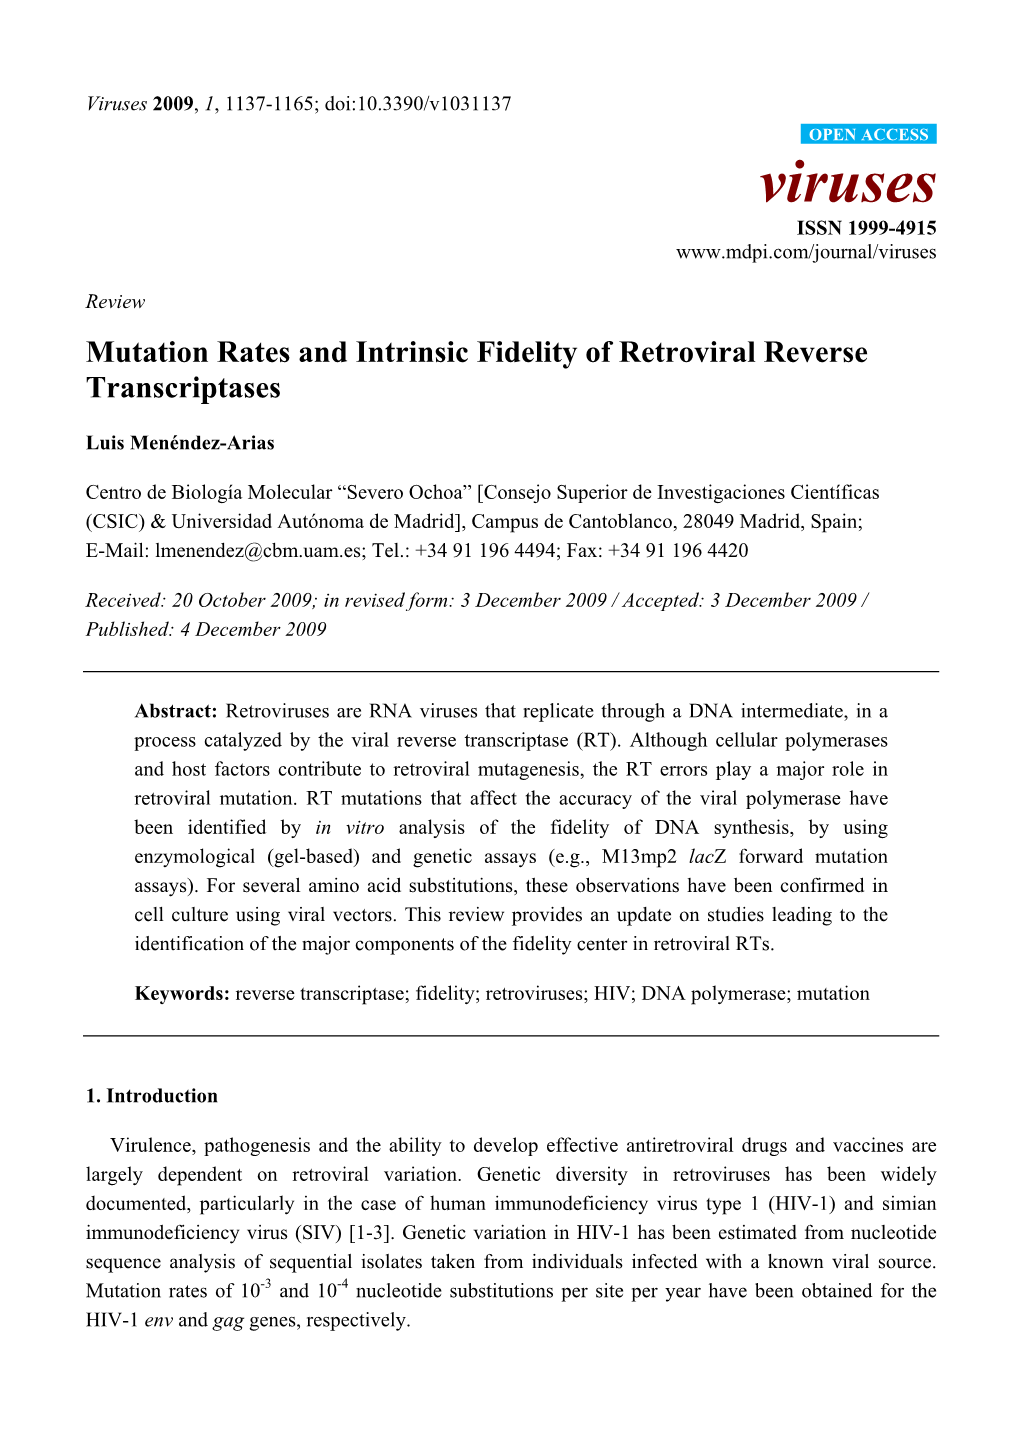 Mutation Rates and Intrinsic Fidelity of Retroviral Reverse Transcriptases